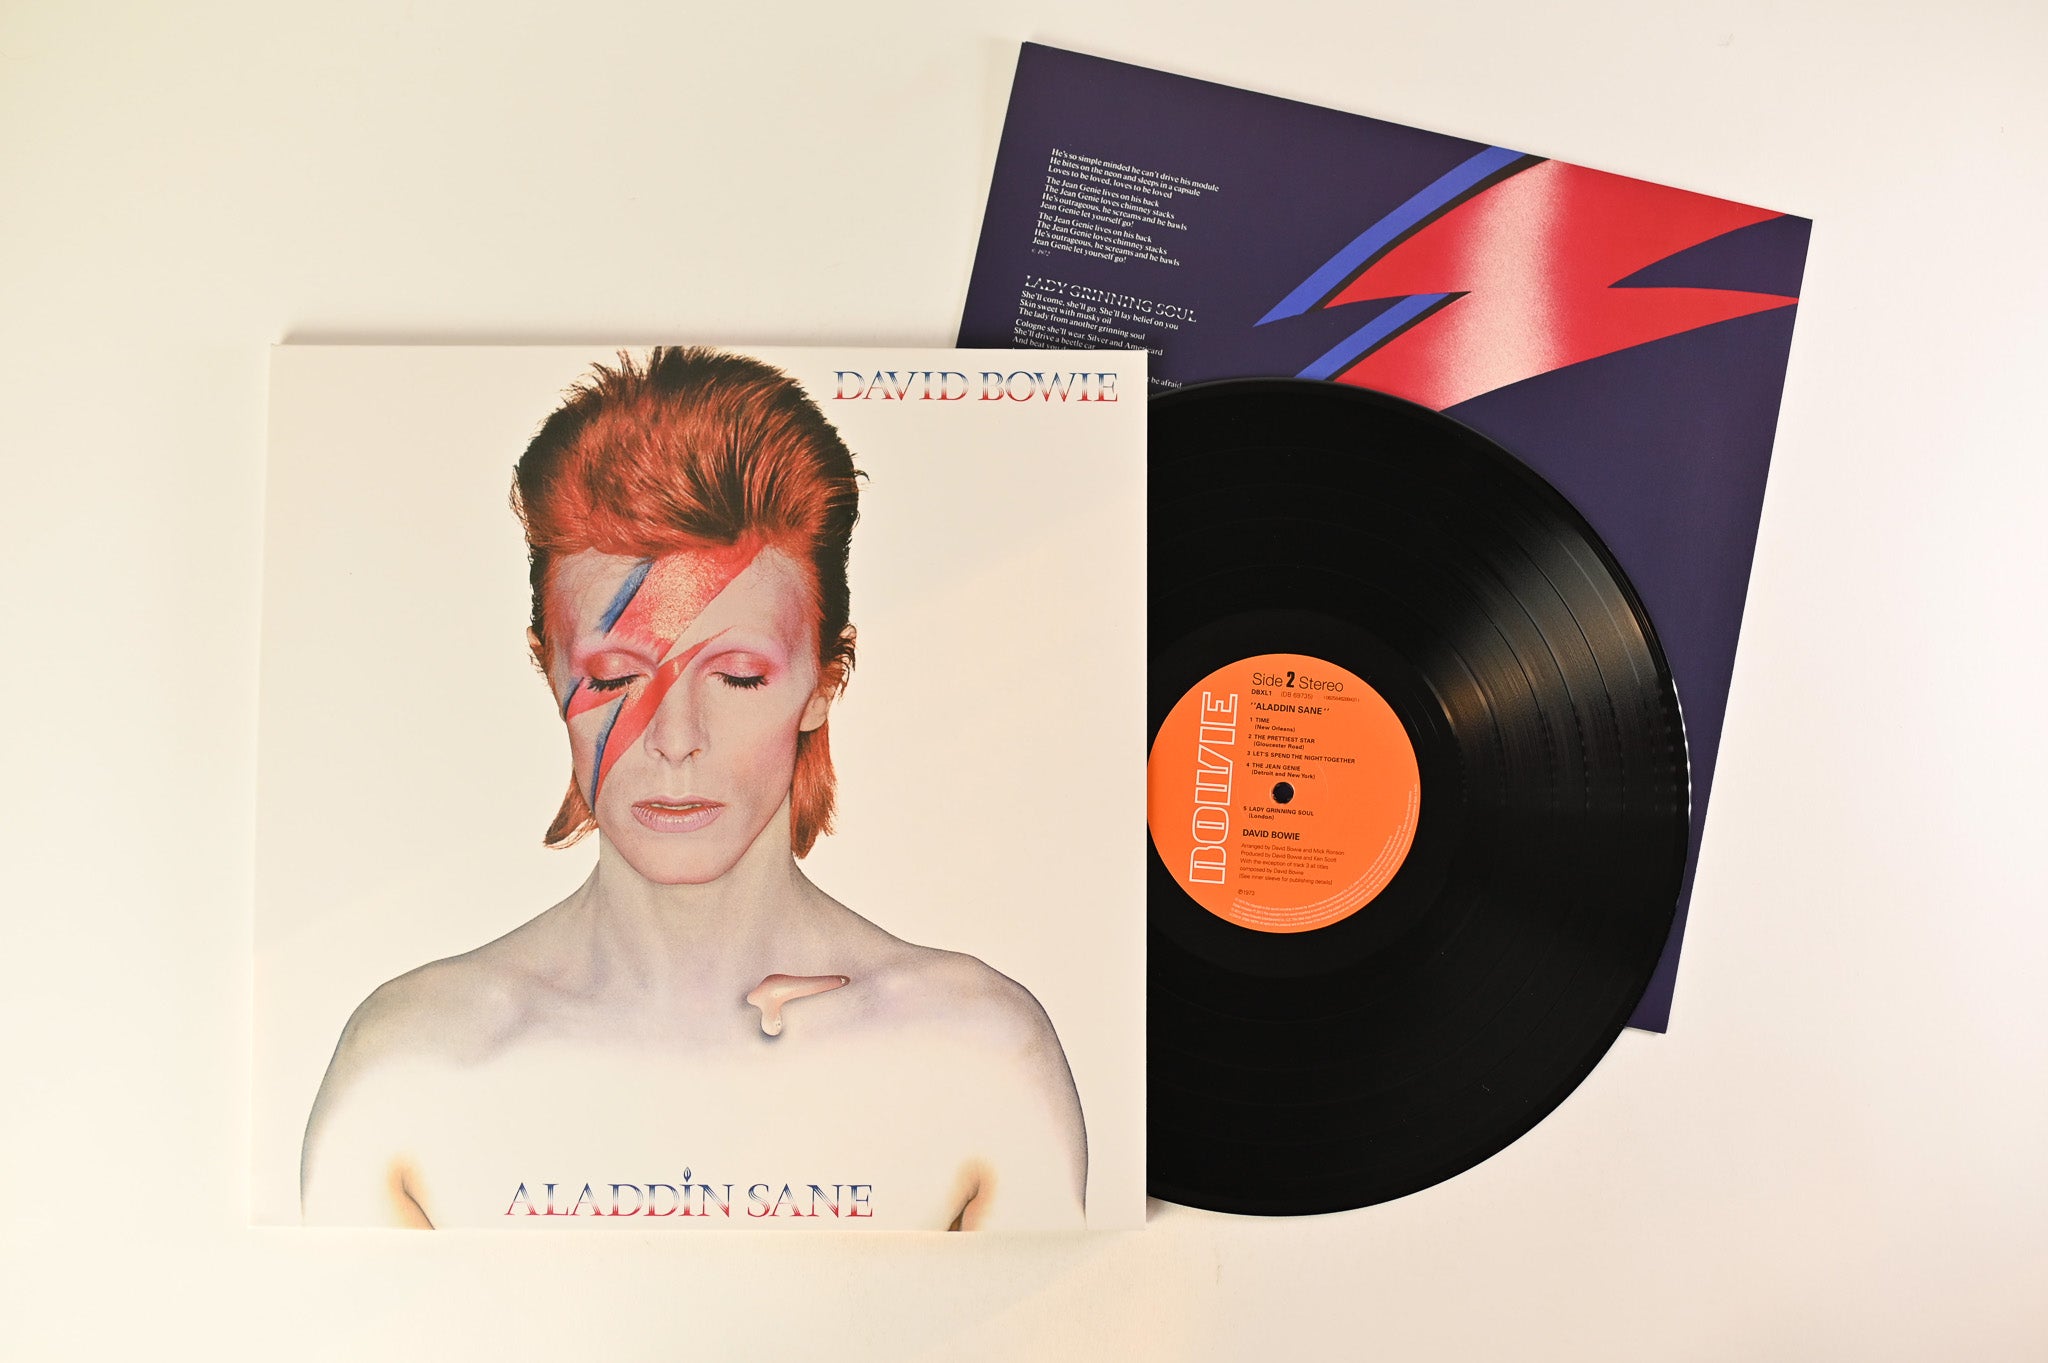 David Bowie - [Five Years 1969 - 1973] on Parlophone Remastered Reissue Box Set